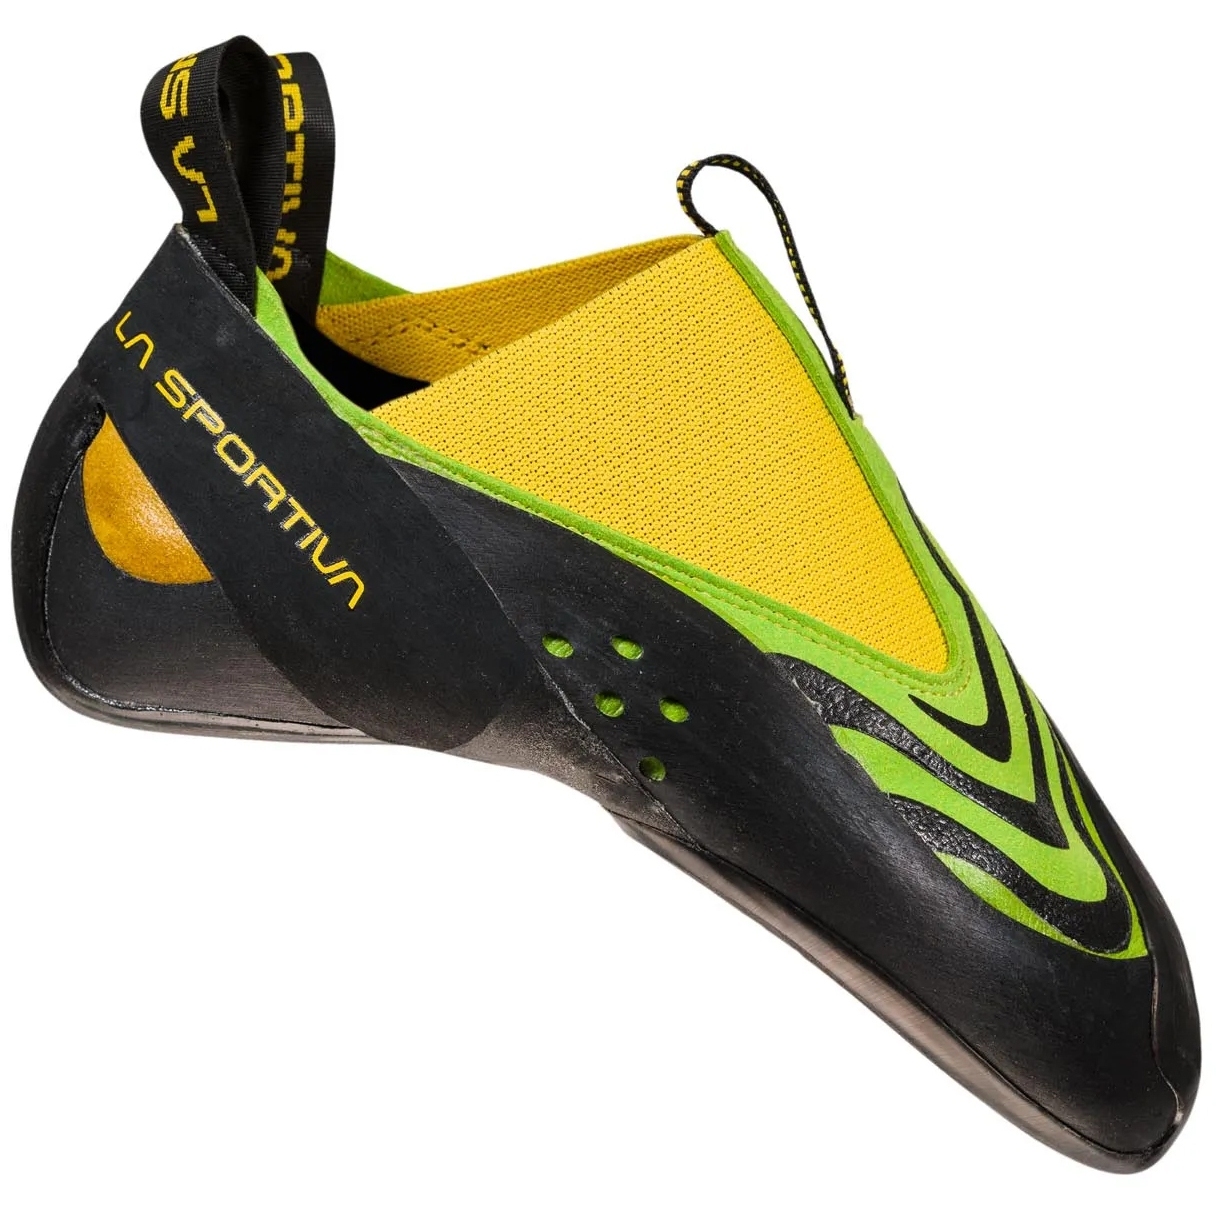 Image of La Sportiva Speedster Climbing Shoes - Lime/Yellow